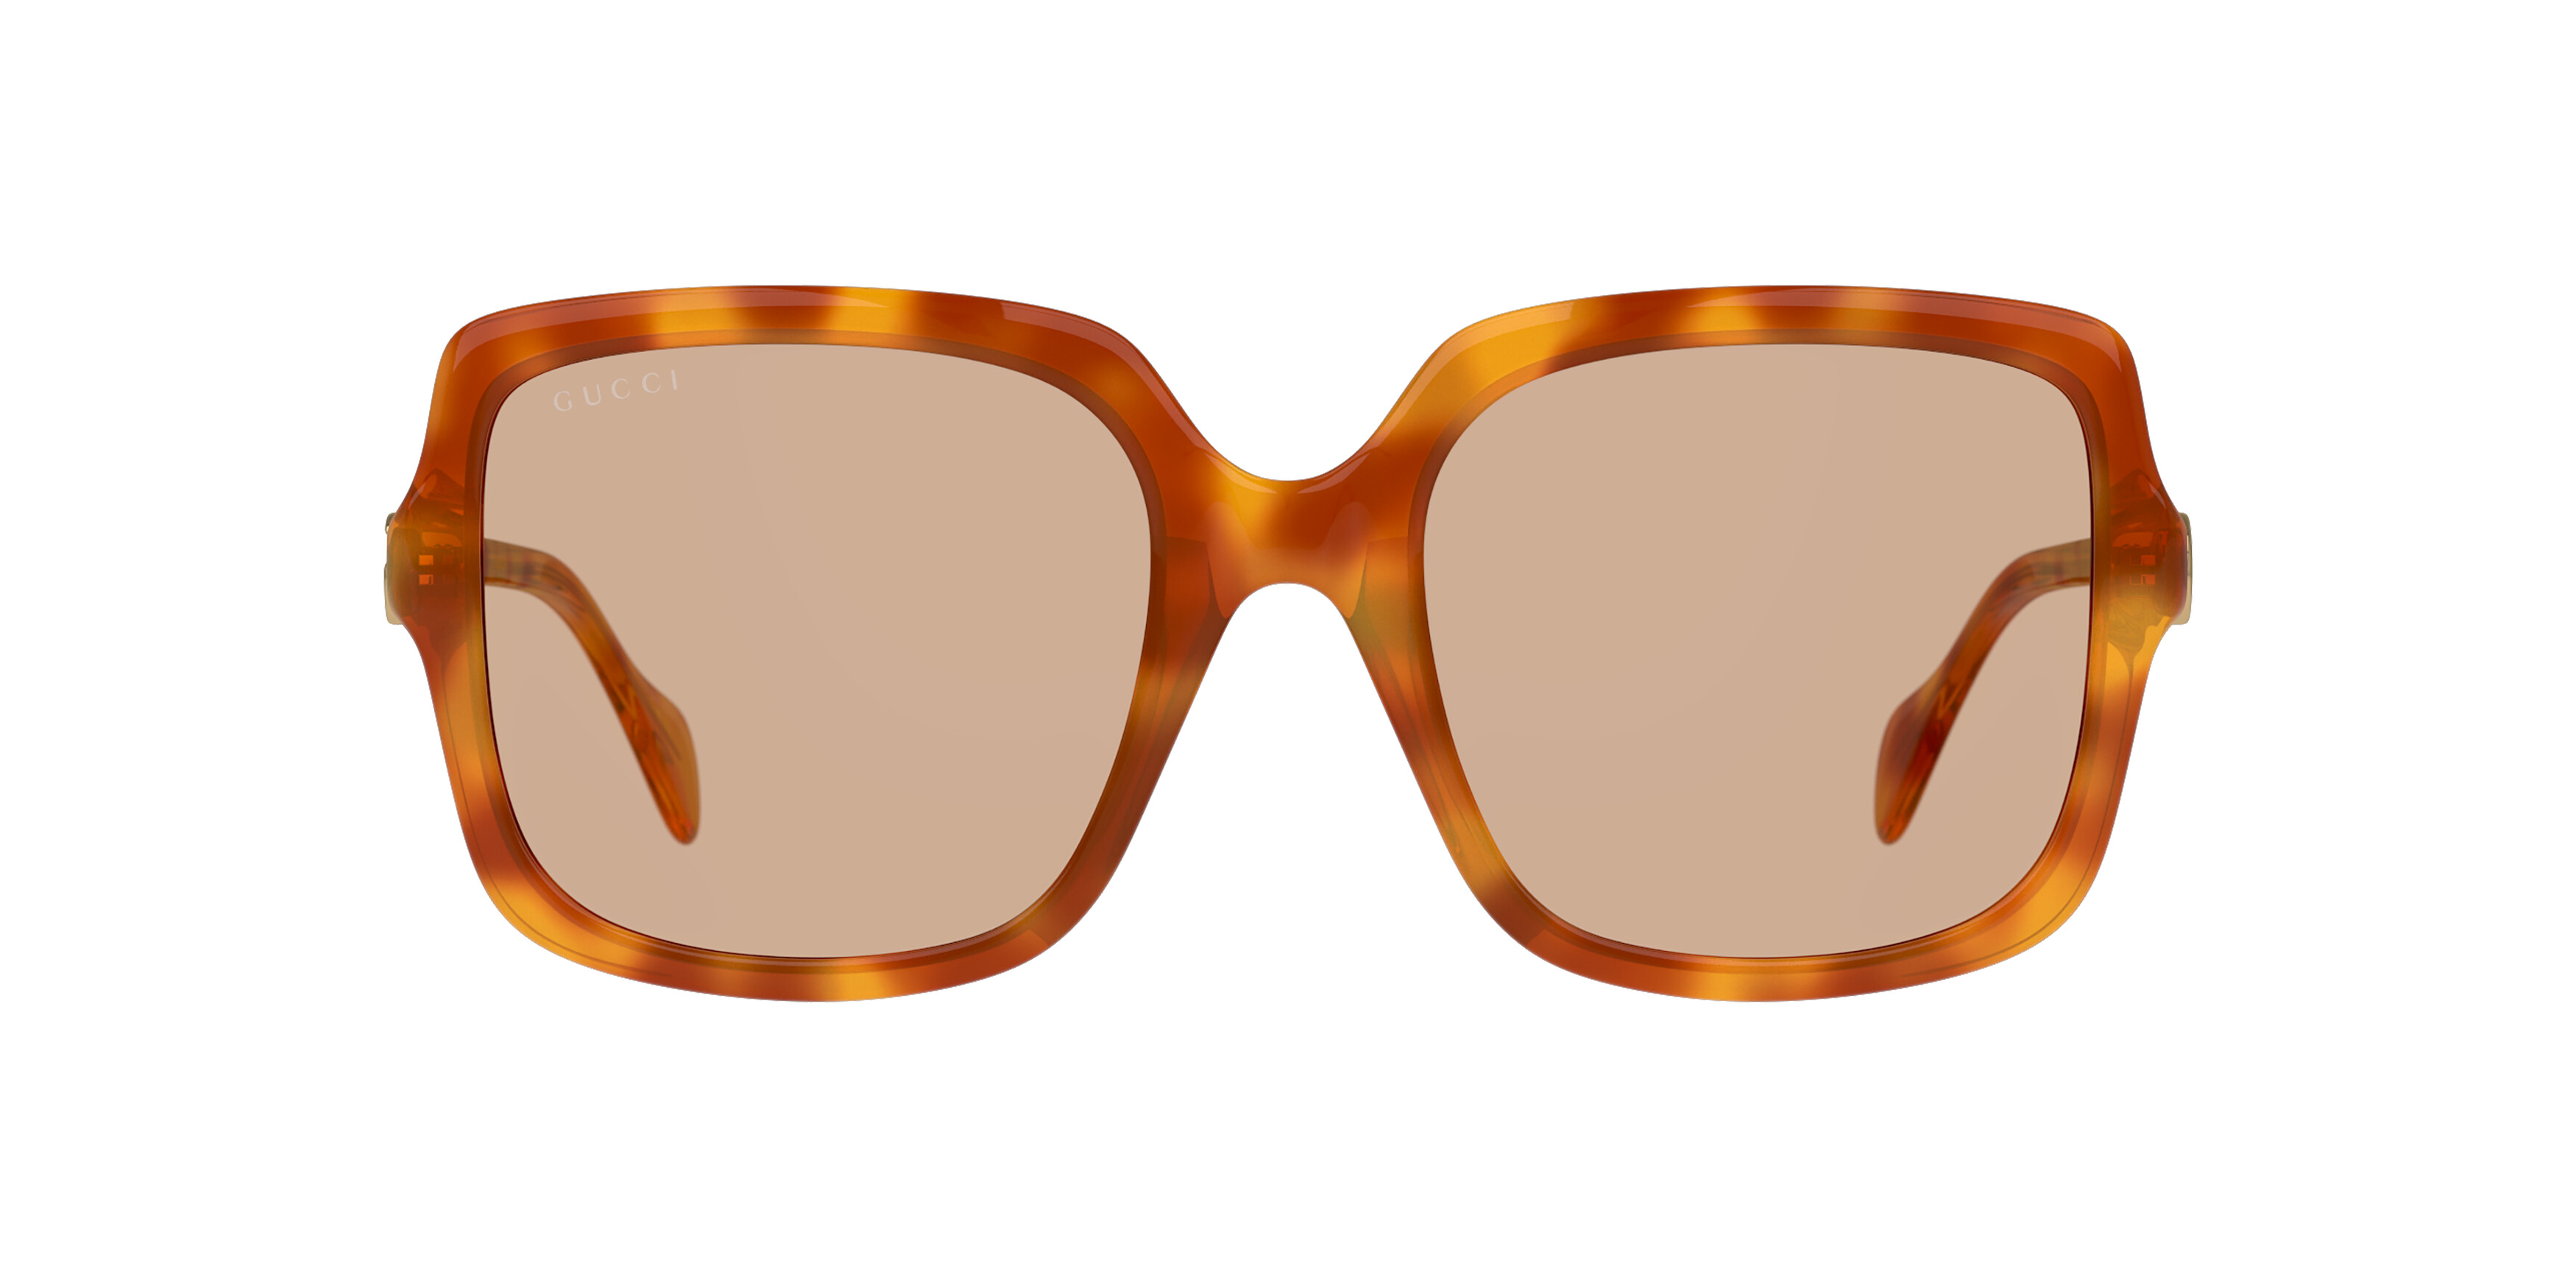 [products.image.front] Gucci GG1070S 002 Sonnenbrille